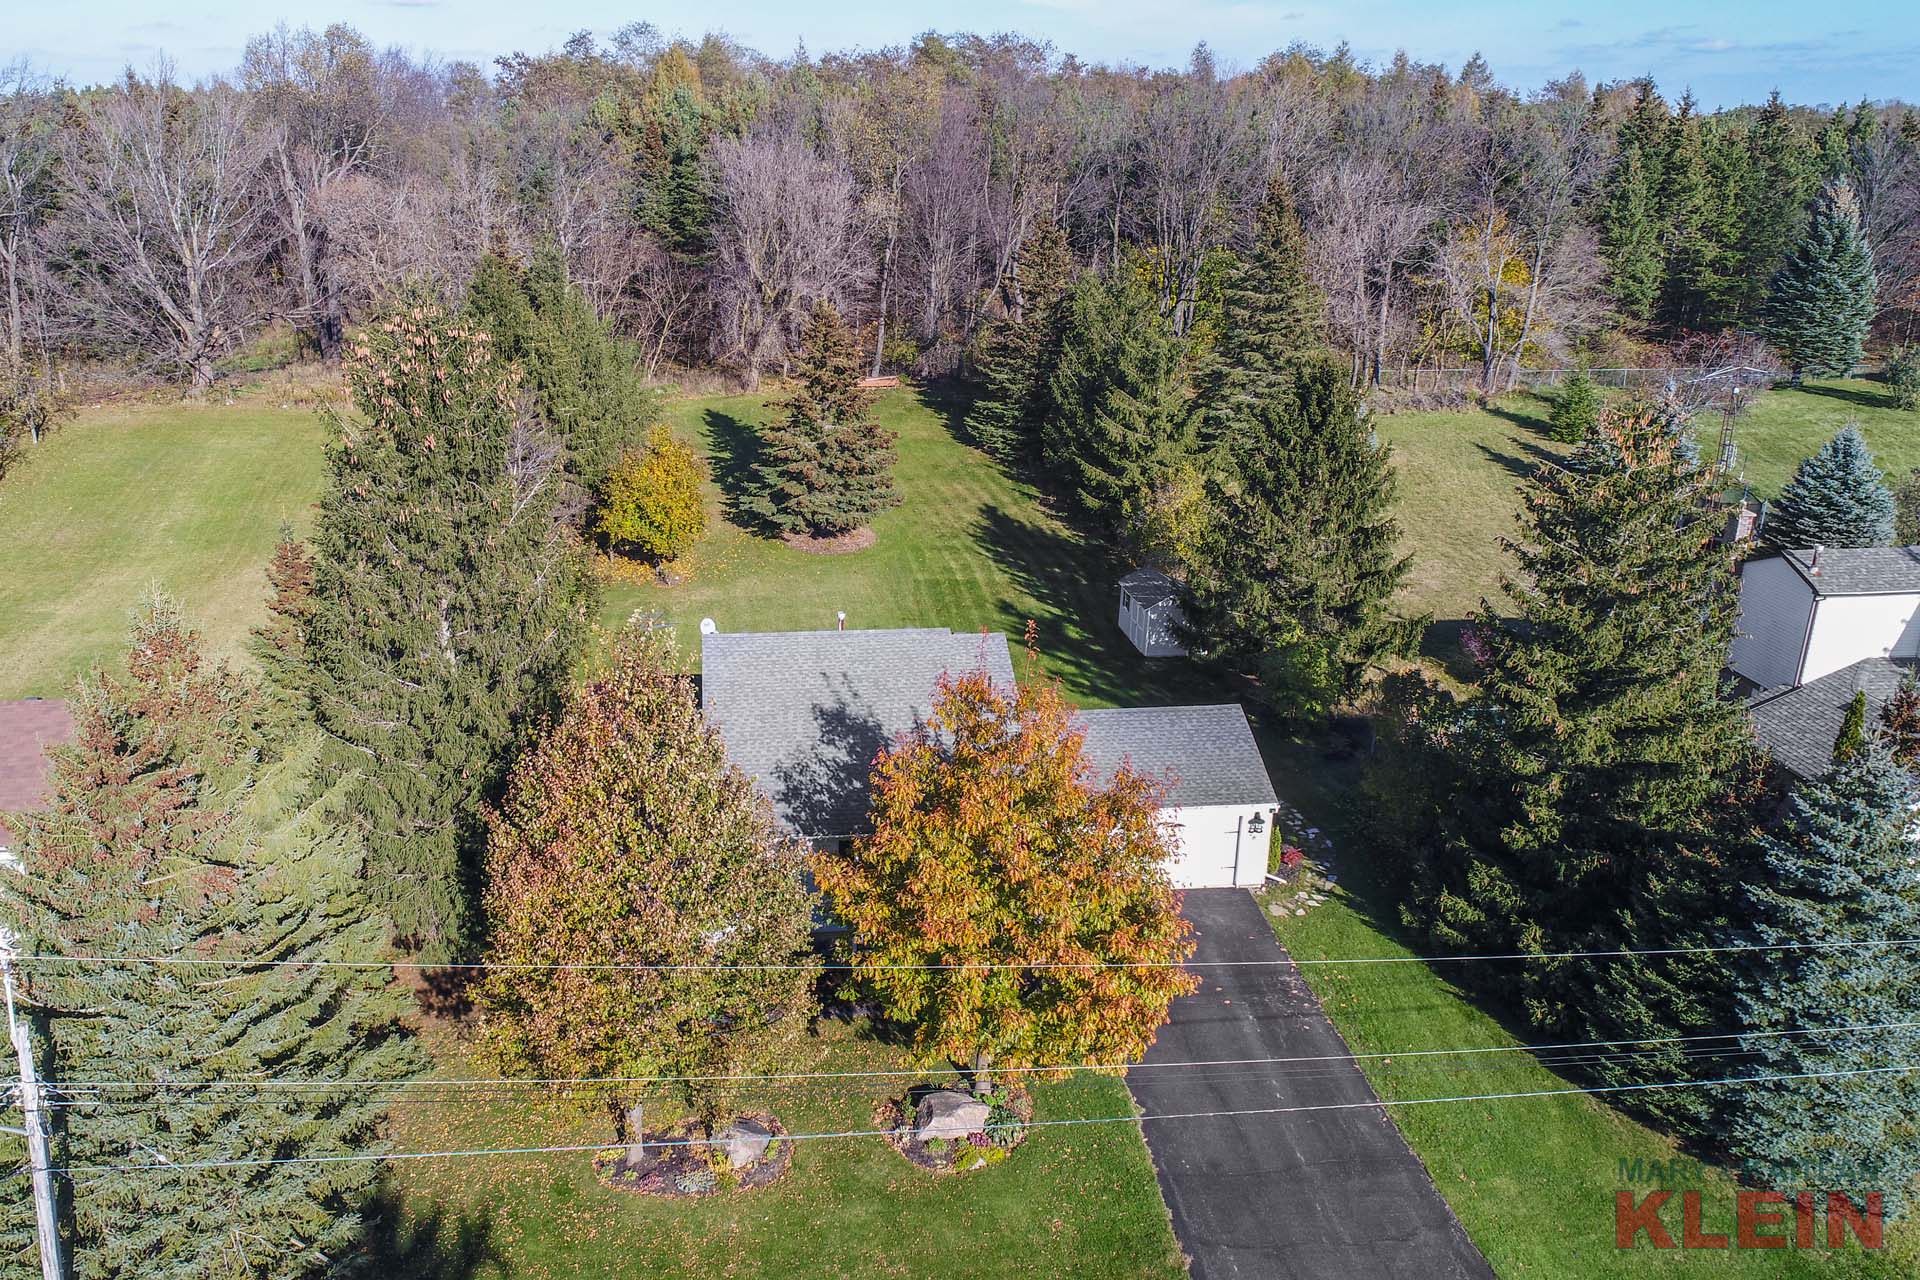 over half and acre, for sale, Caledon, raised bungalow, mary klein, kait klein 